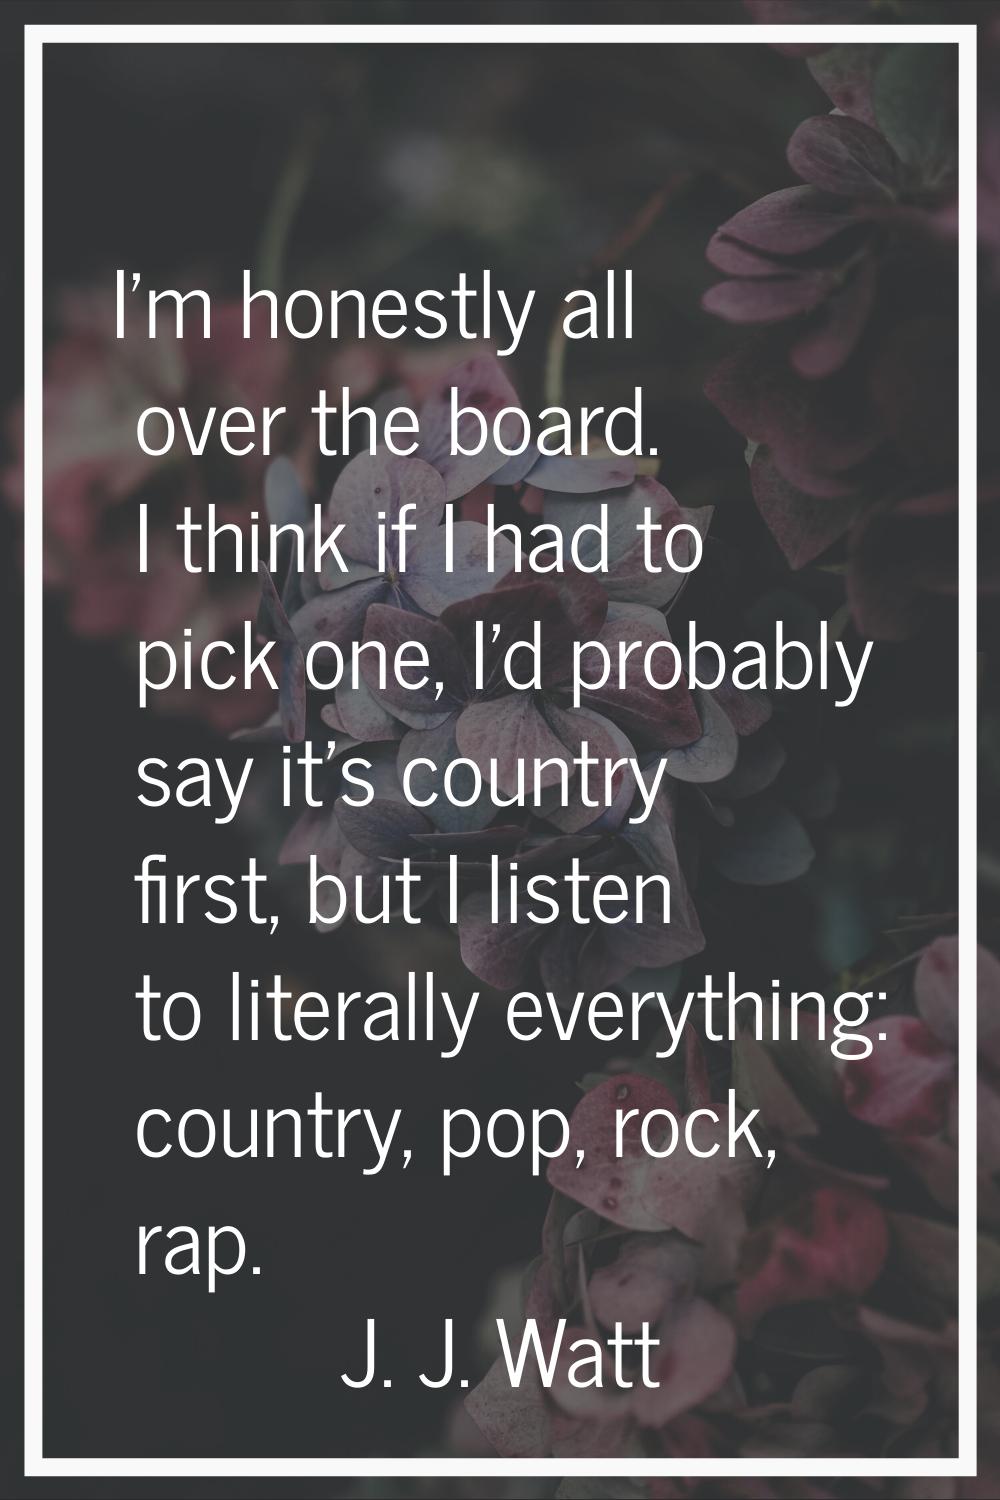 I'm honestly all over the board. I think if I had to pick one, I'd probably say it's country first,